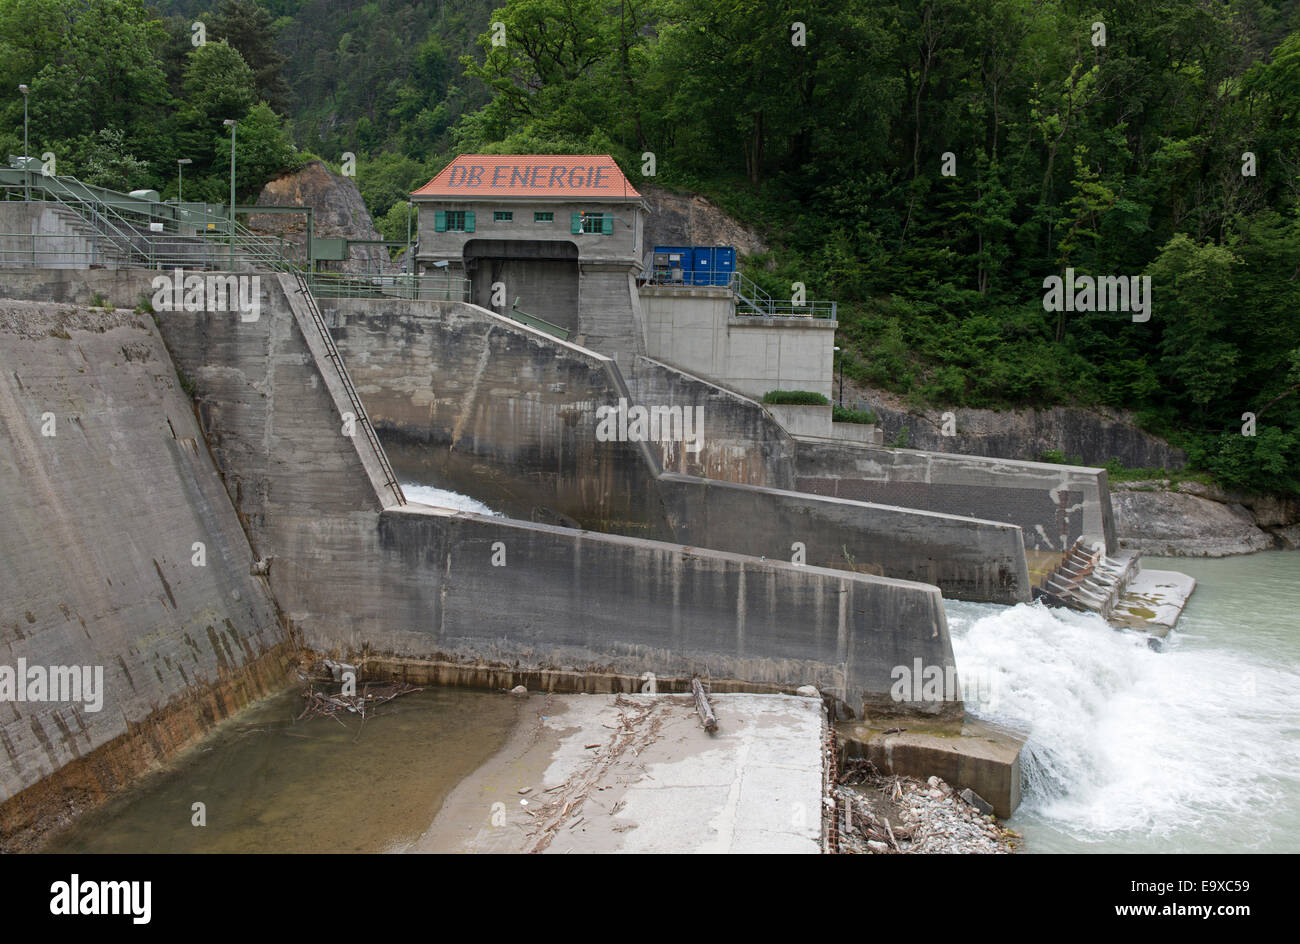 DB Energie hydroelectric power station on the river Saalach, Bavaria, Germany. Stock Photo